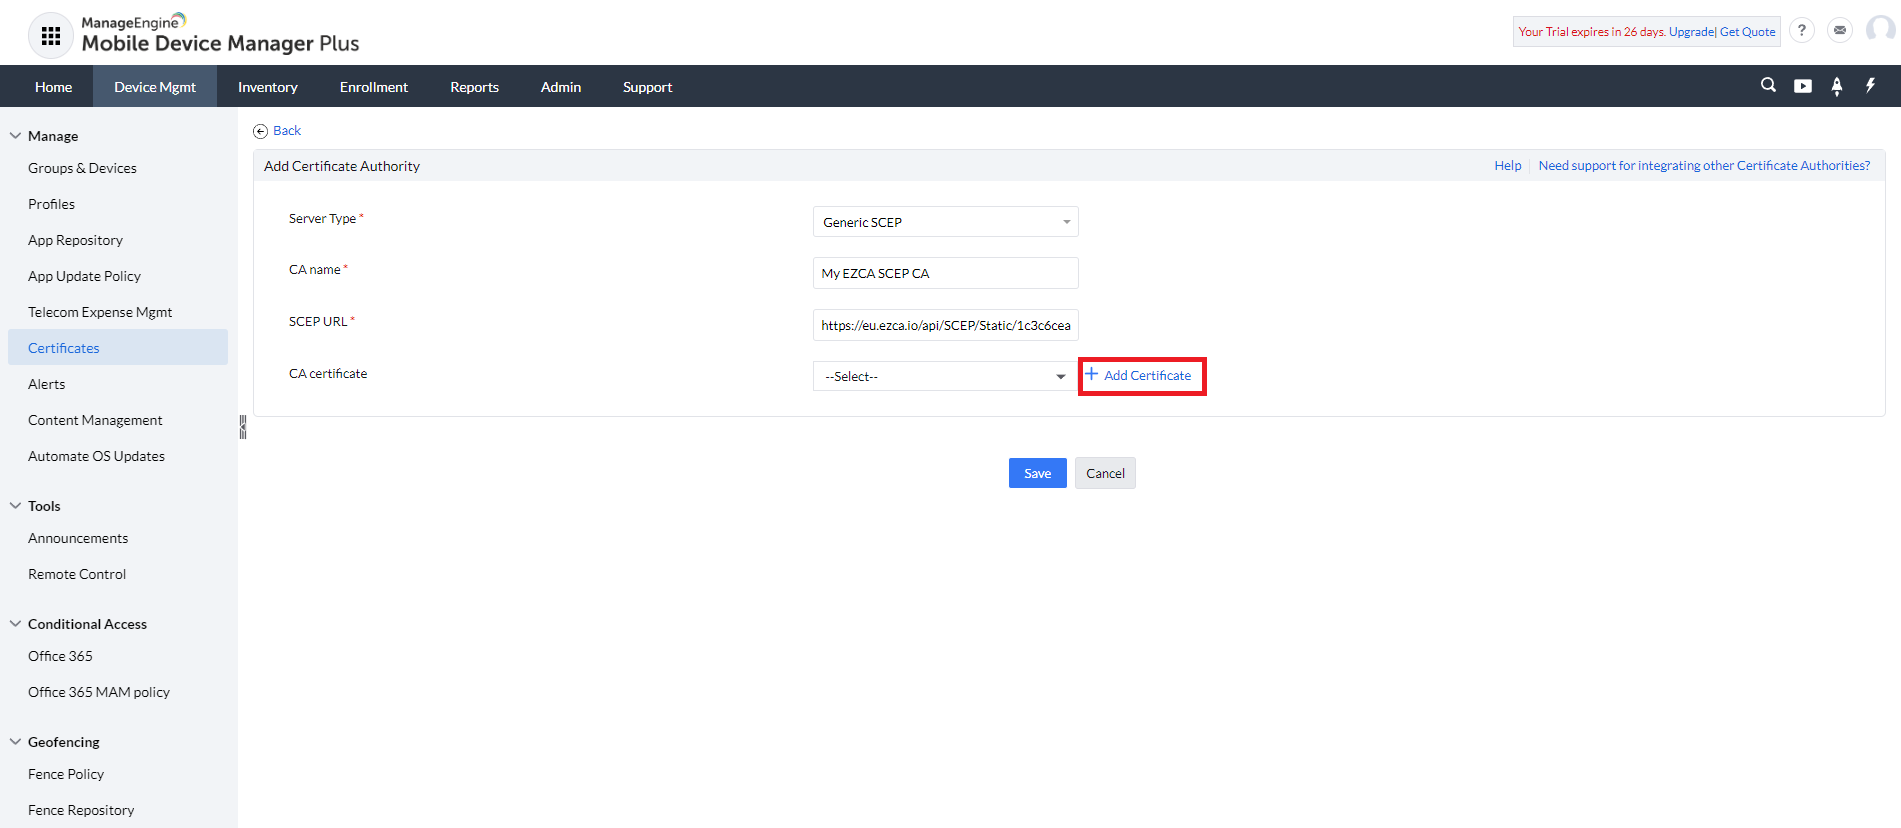 Past SCEP Certificate Authority URL in Manage Engine MDM Plus